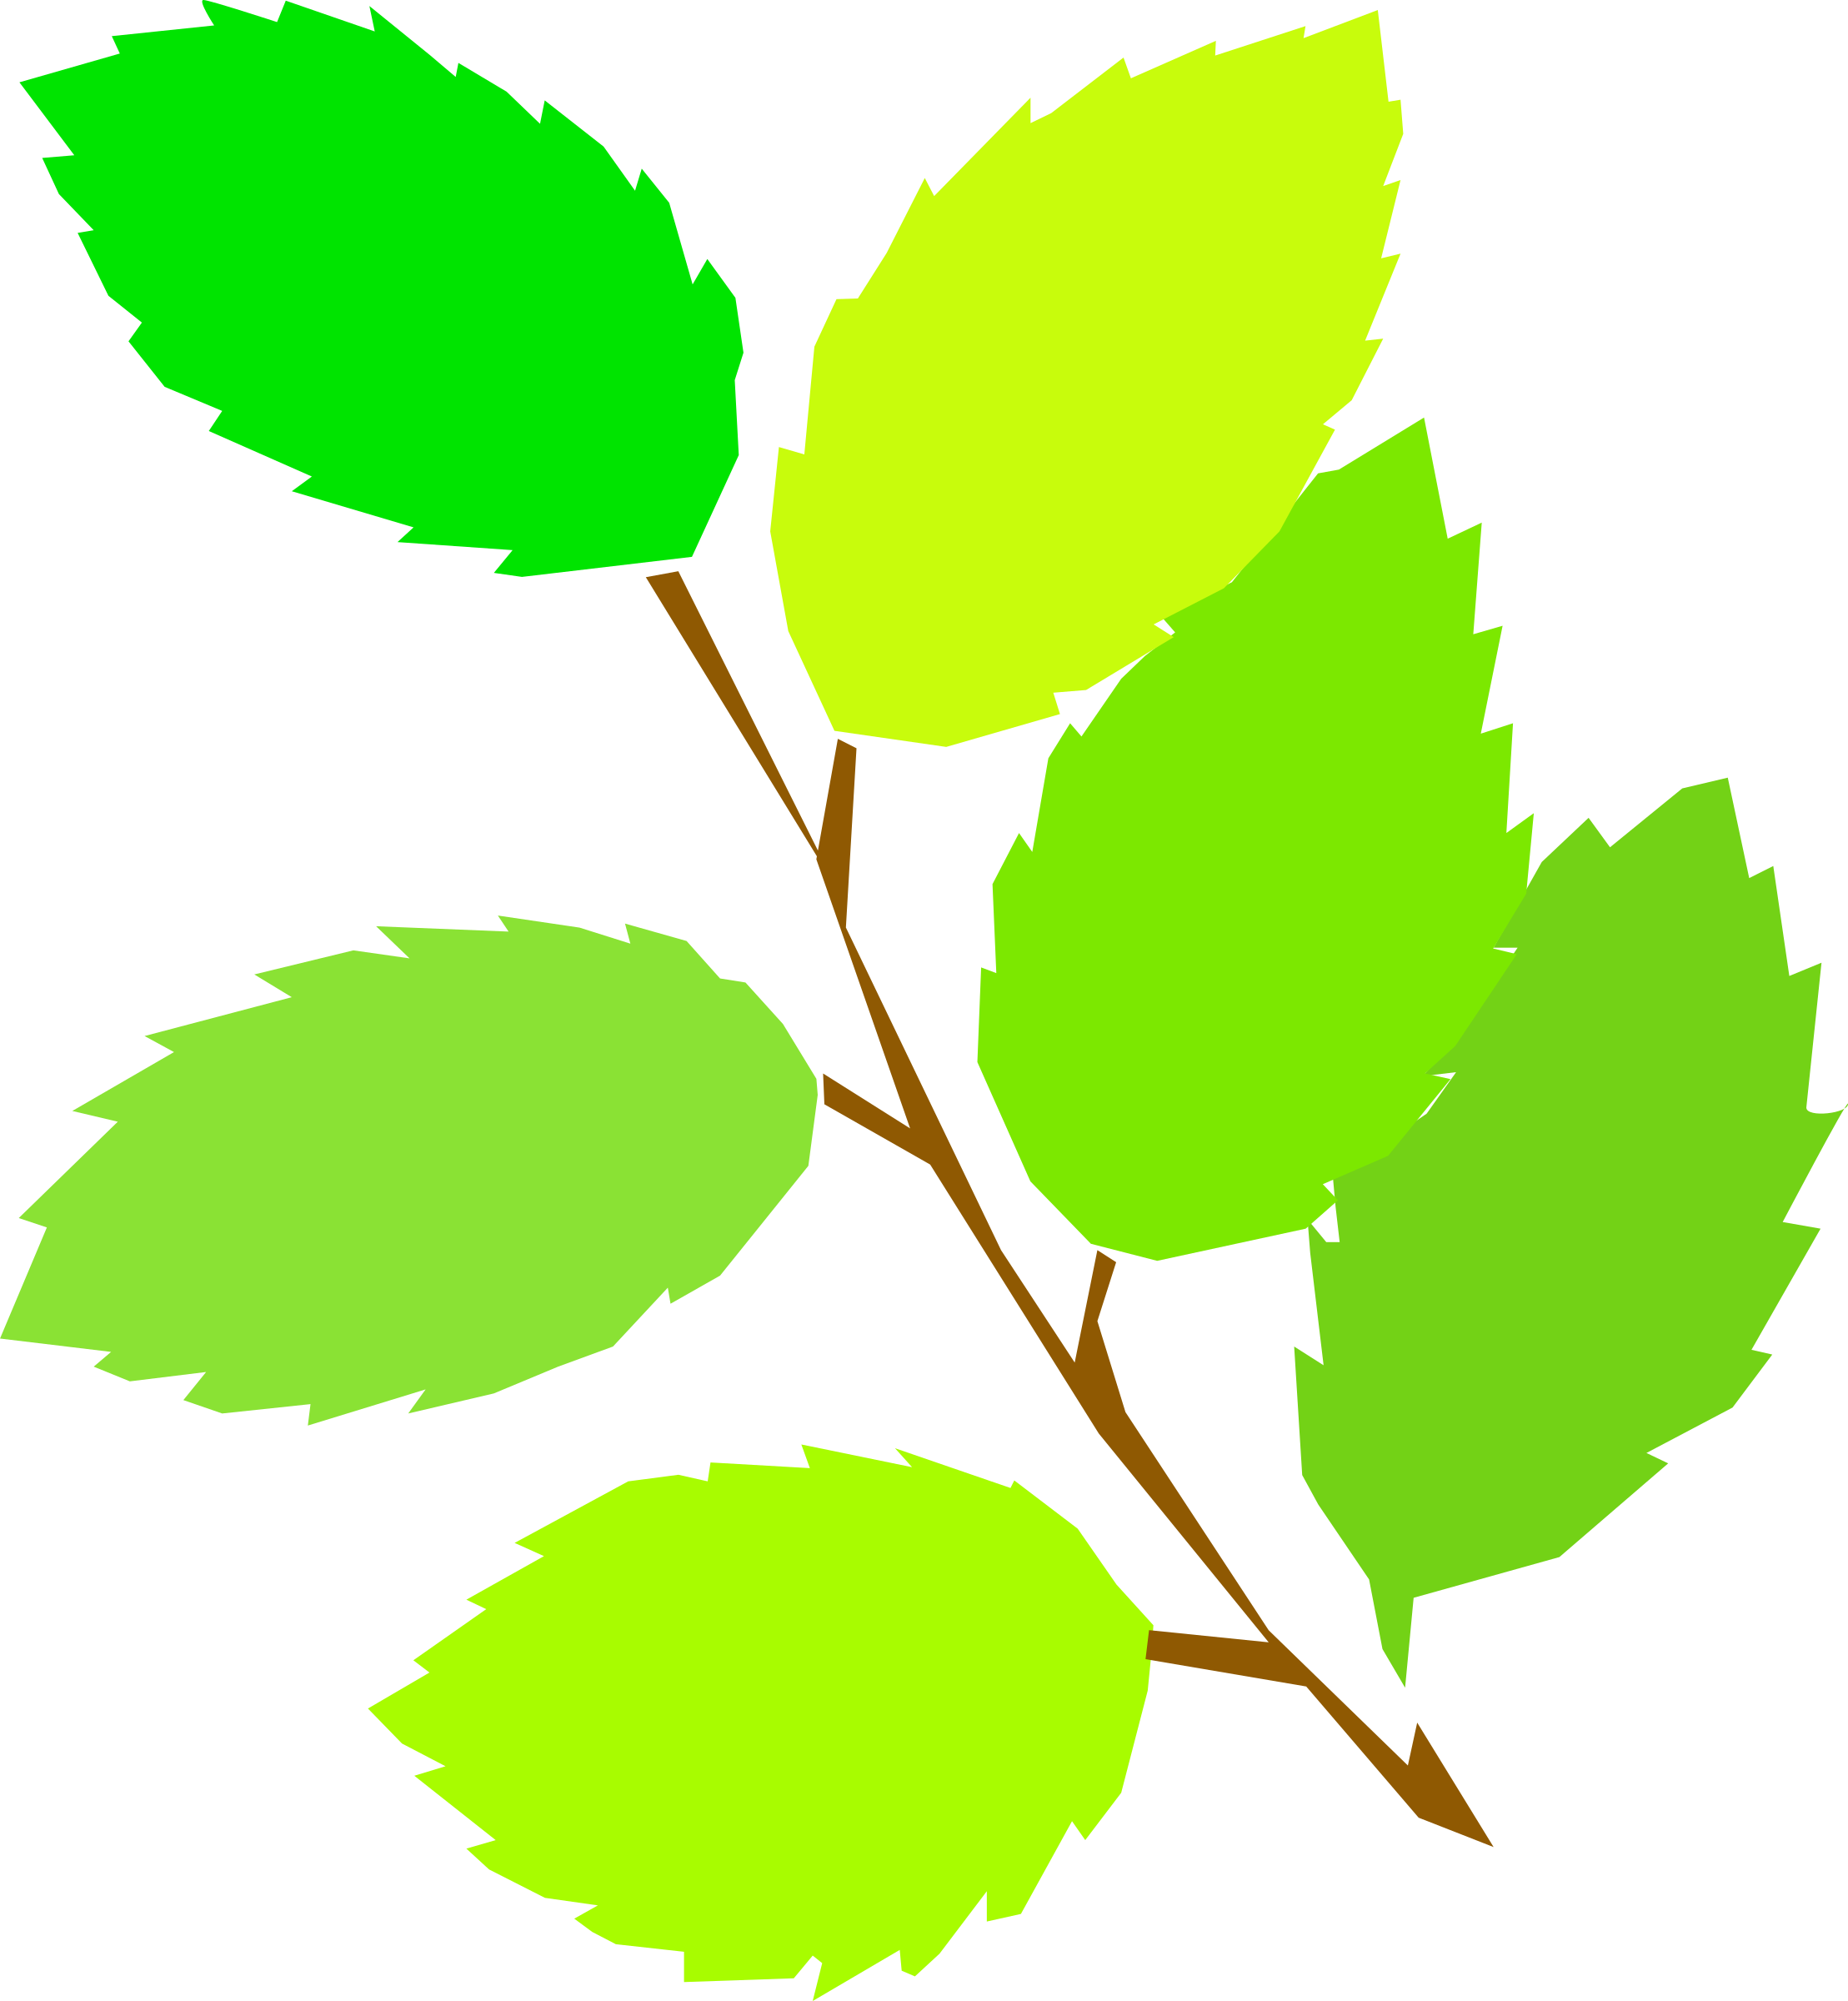 Leaves clipart free.